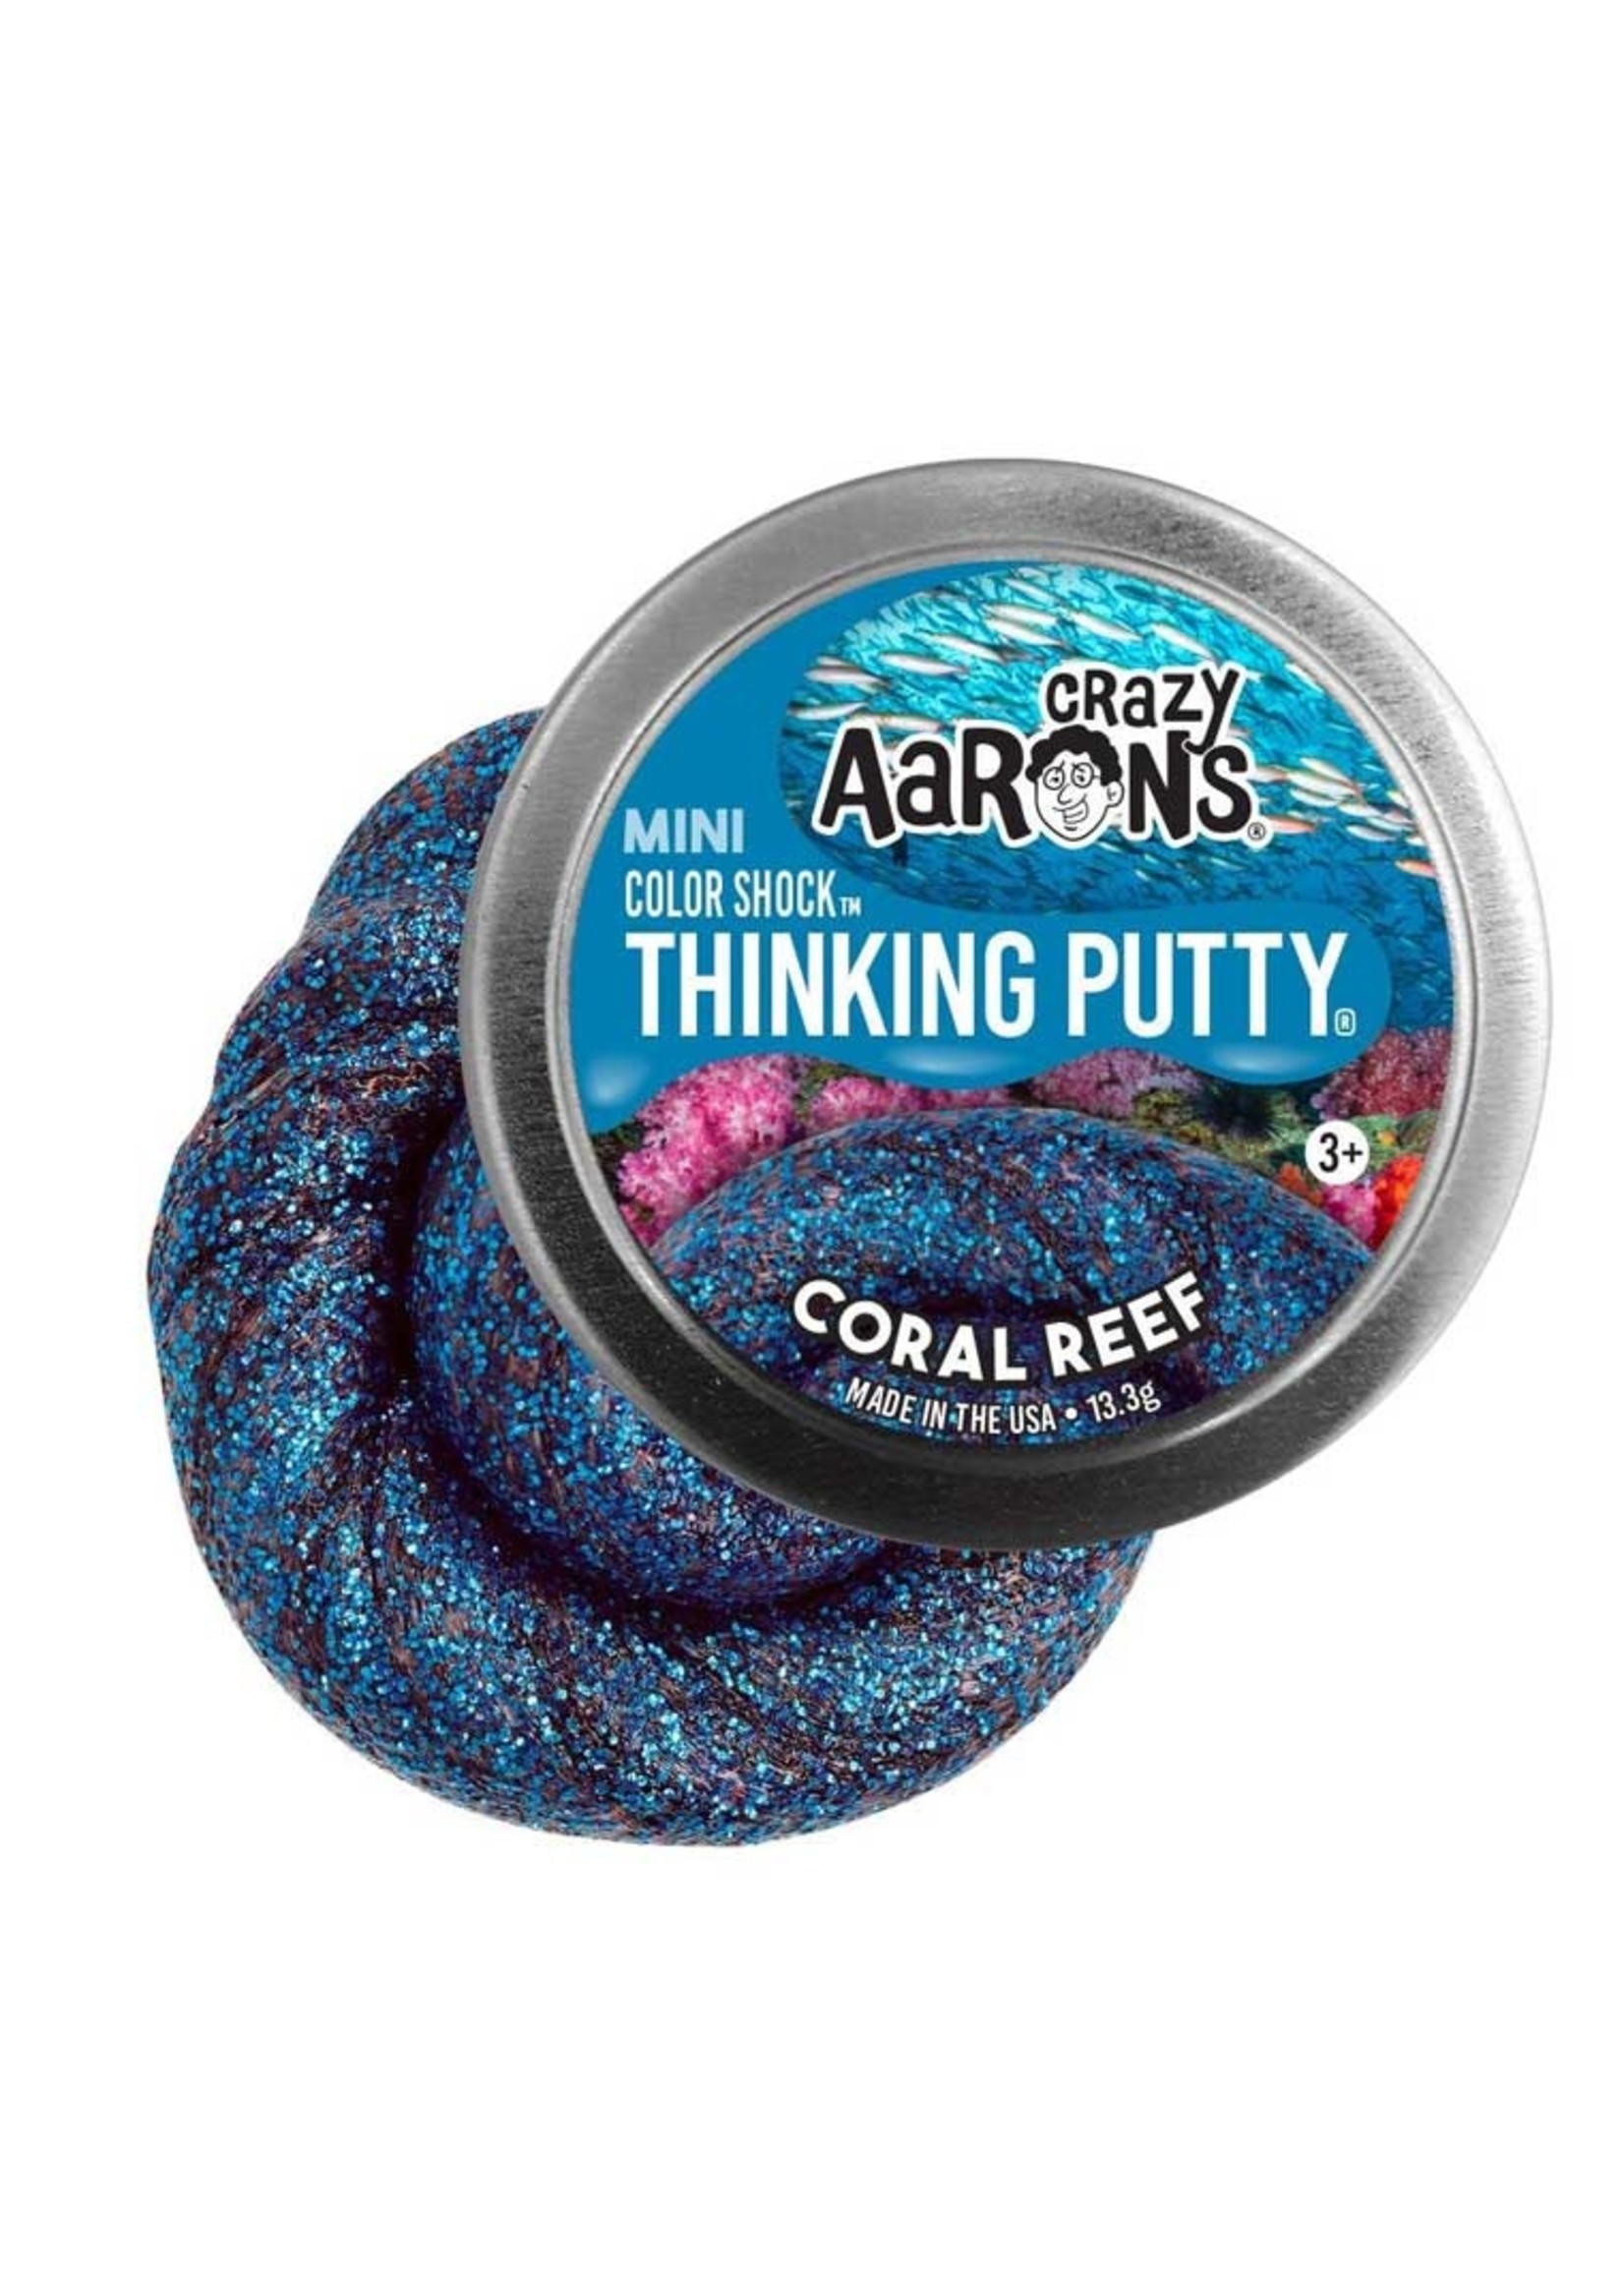 Crazy Aaron's Thinking Putty Mini Tin Coral Reef